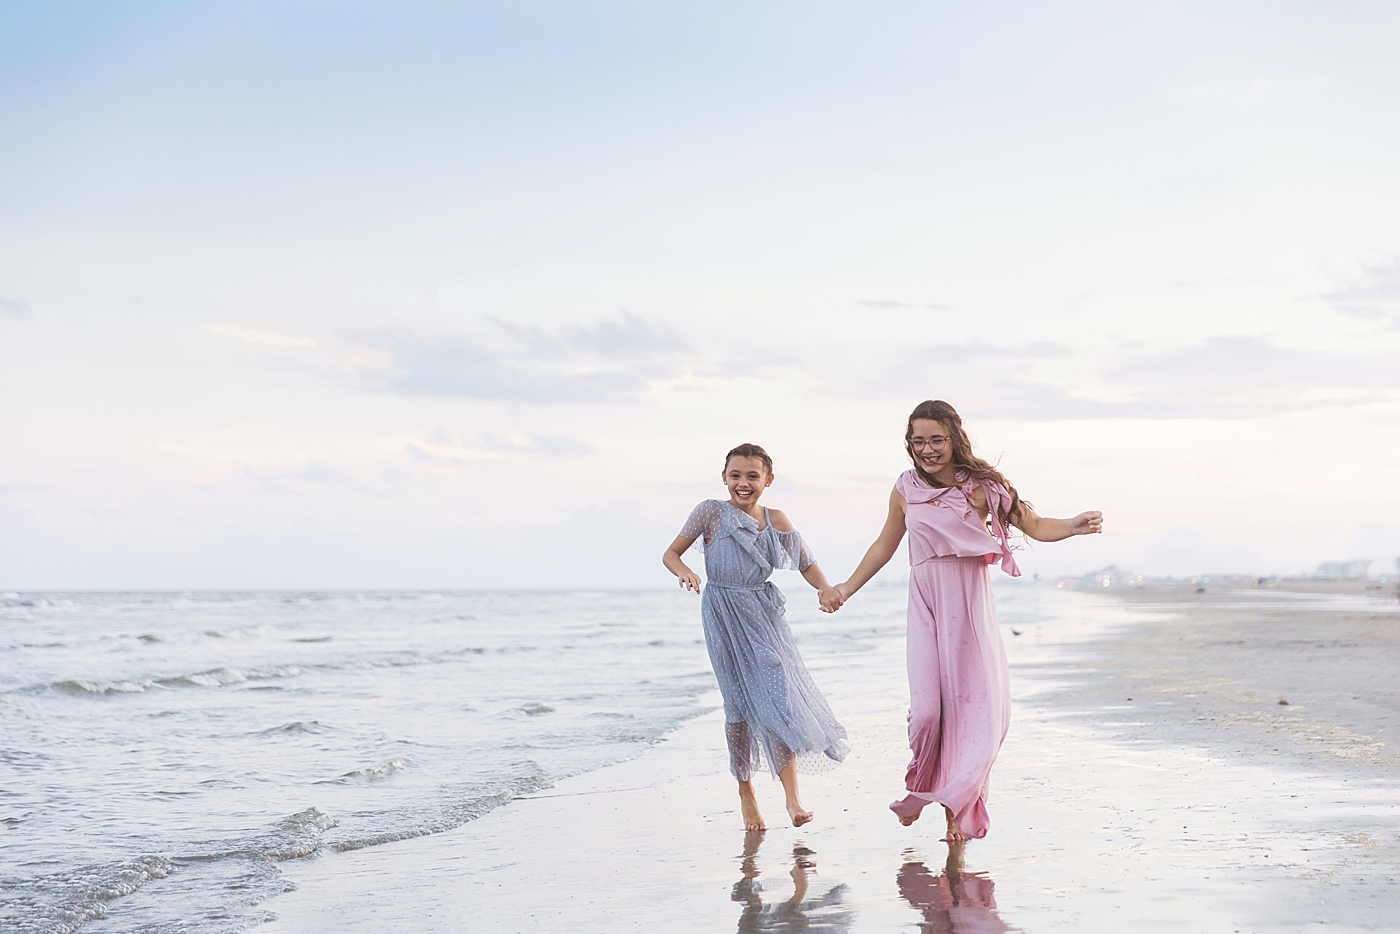 Sisters playing in the water together on Galveston beach. Photo by Fresh Light Photography.